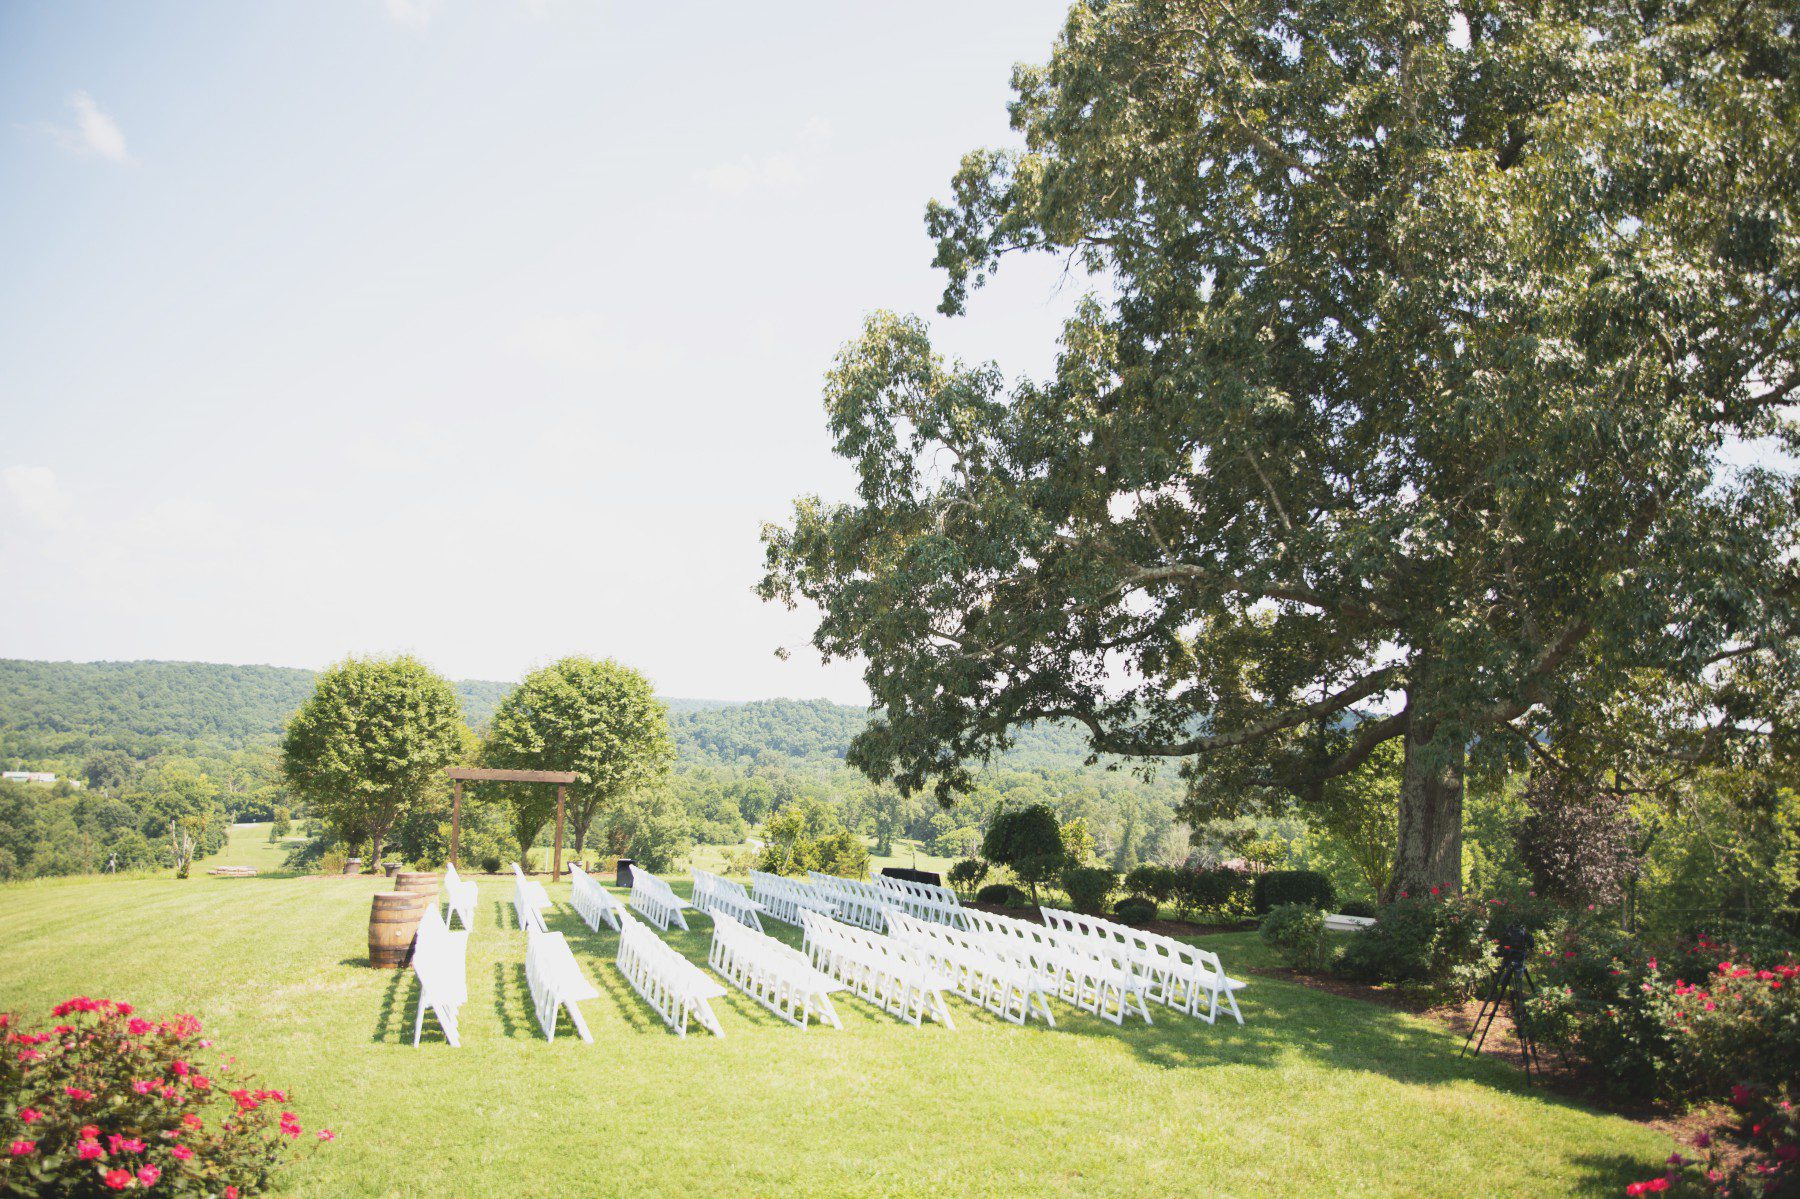 Lovely outdoor ceremony setup at Front Porch Farms with rolling hills in background, Nashville TN